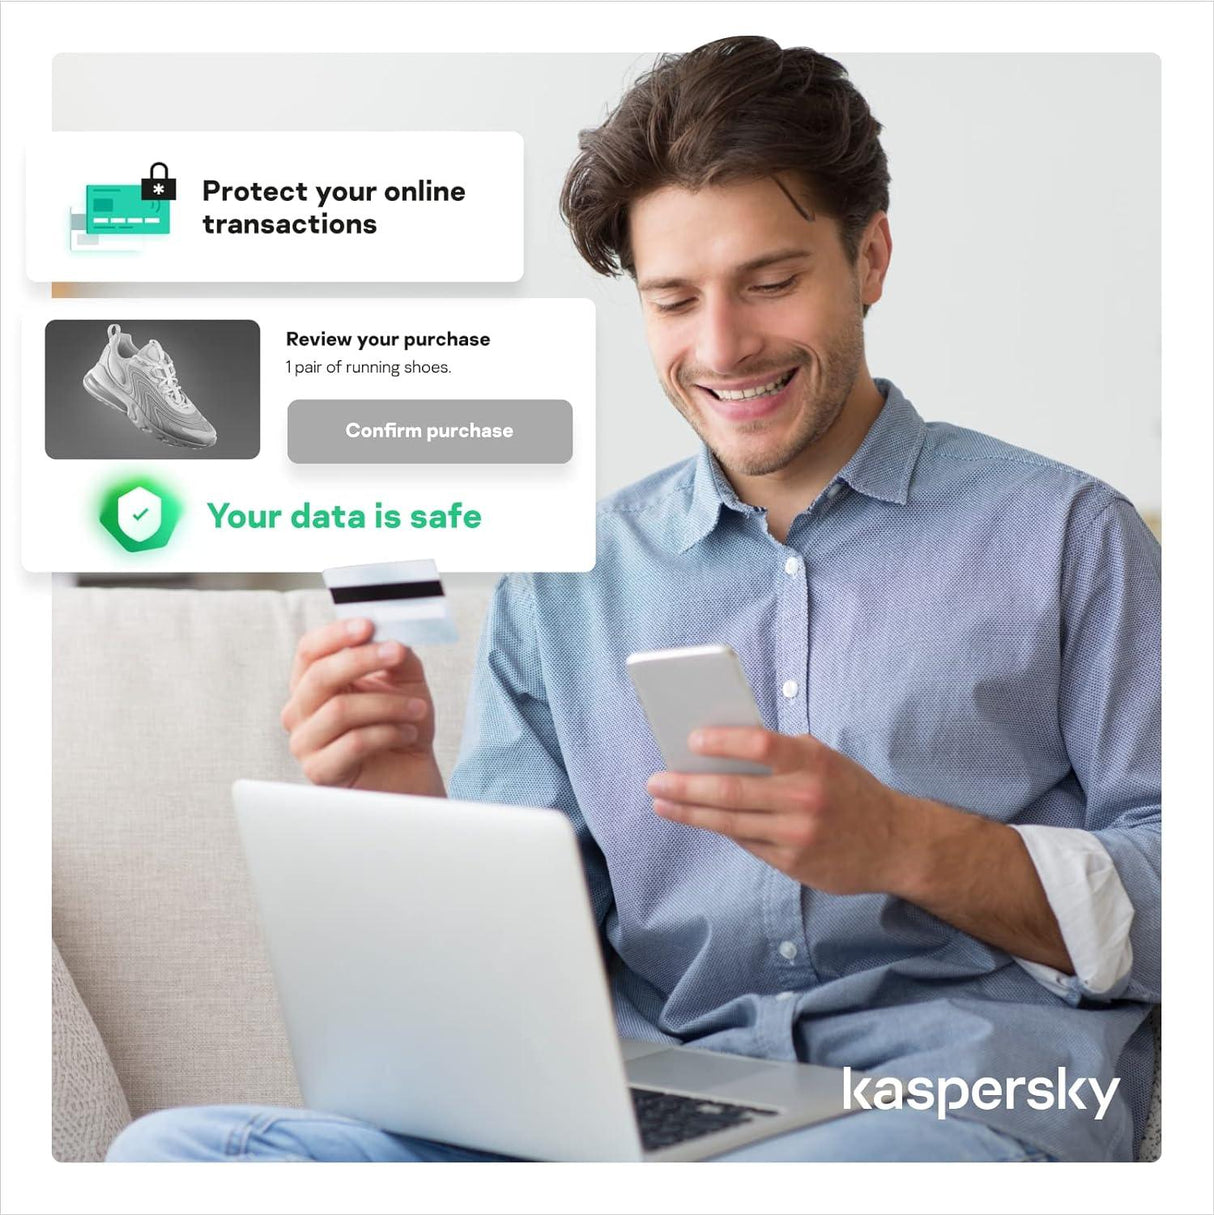 Kaspersky Standard 2023 - Instant Download for Windows and Mac (1 Computer) - SoftwareCW - Authorized Reseller